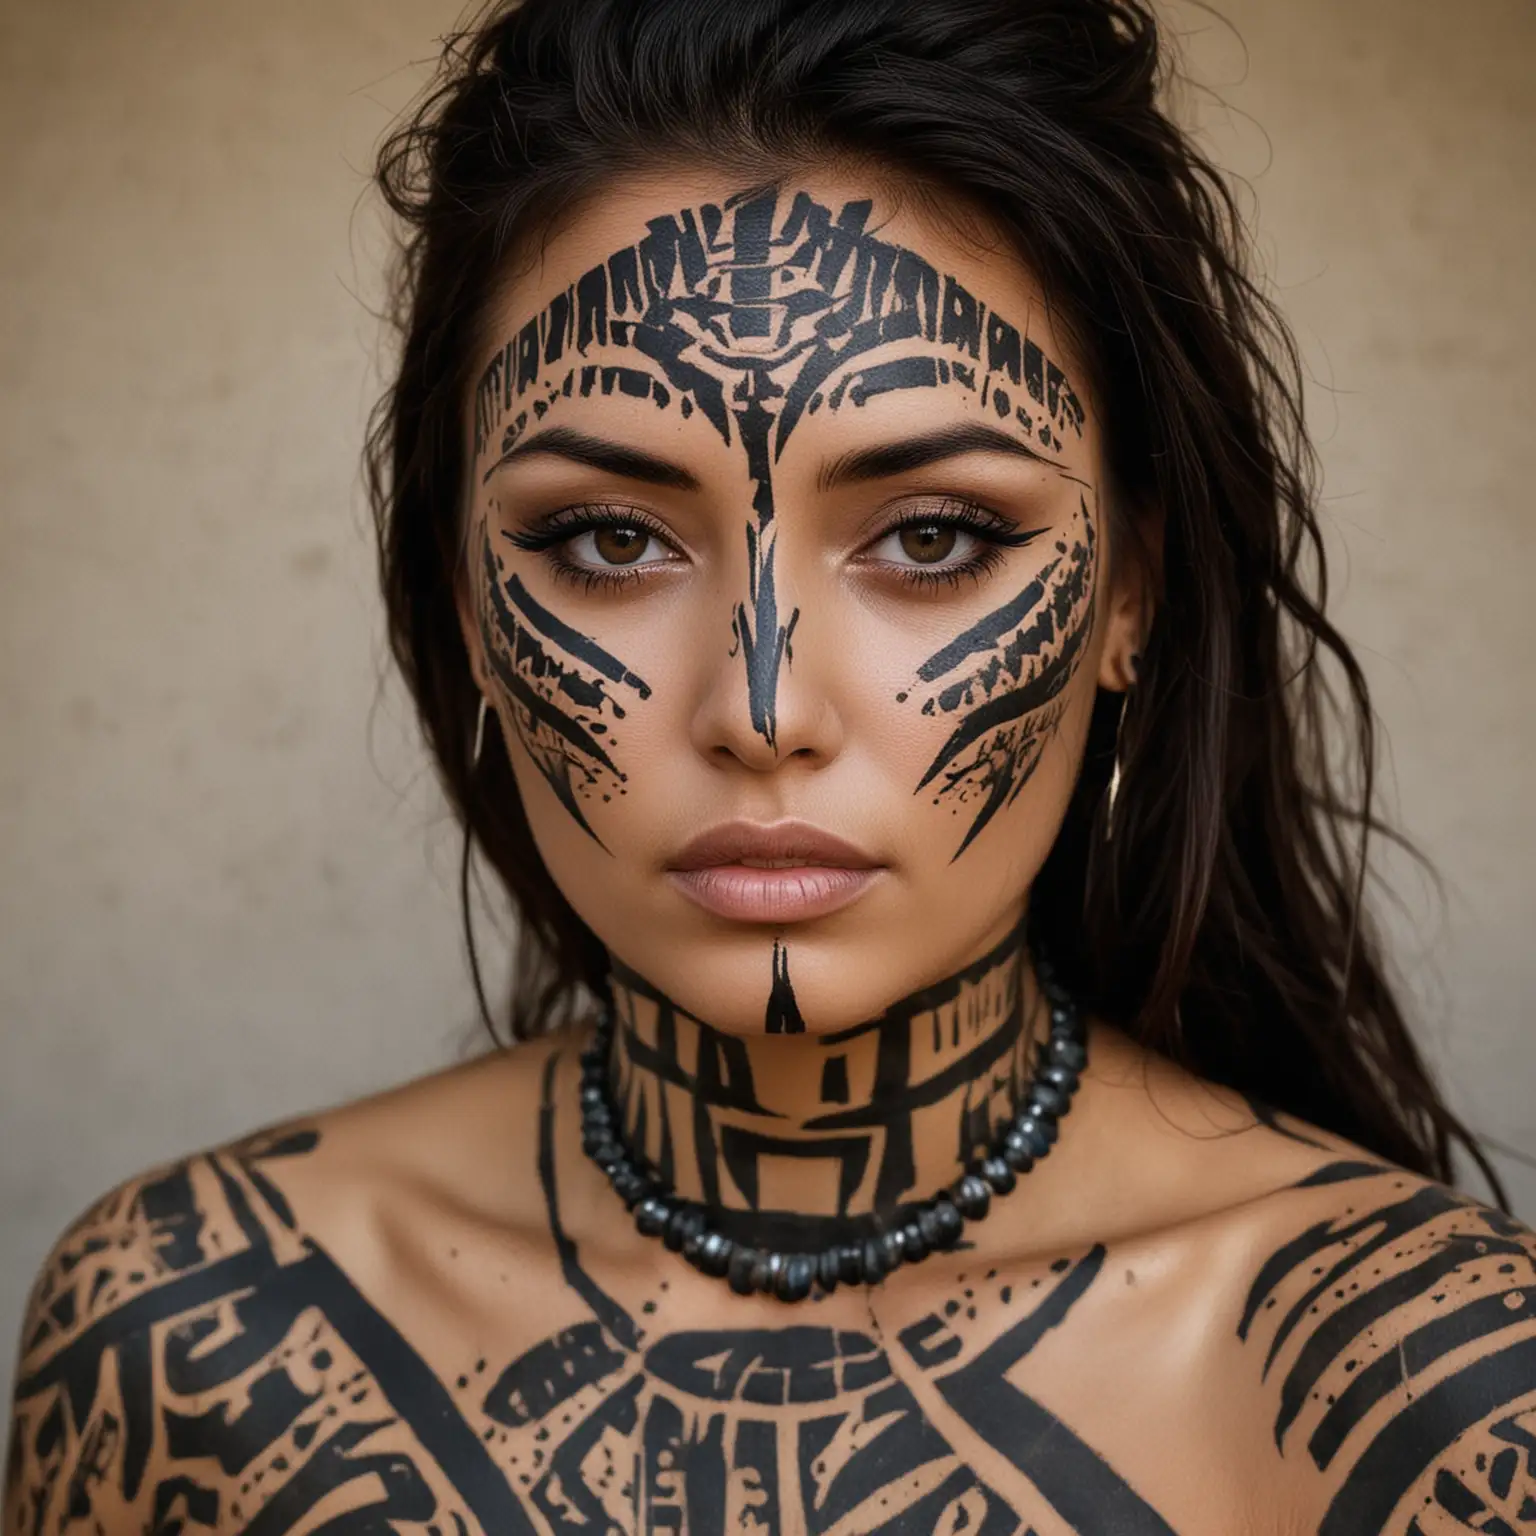 Beautiful Woman with Tribal War Paint and Tattoos